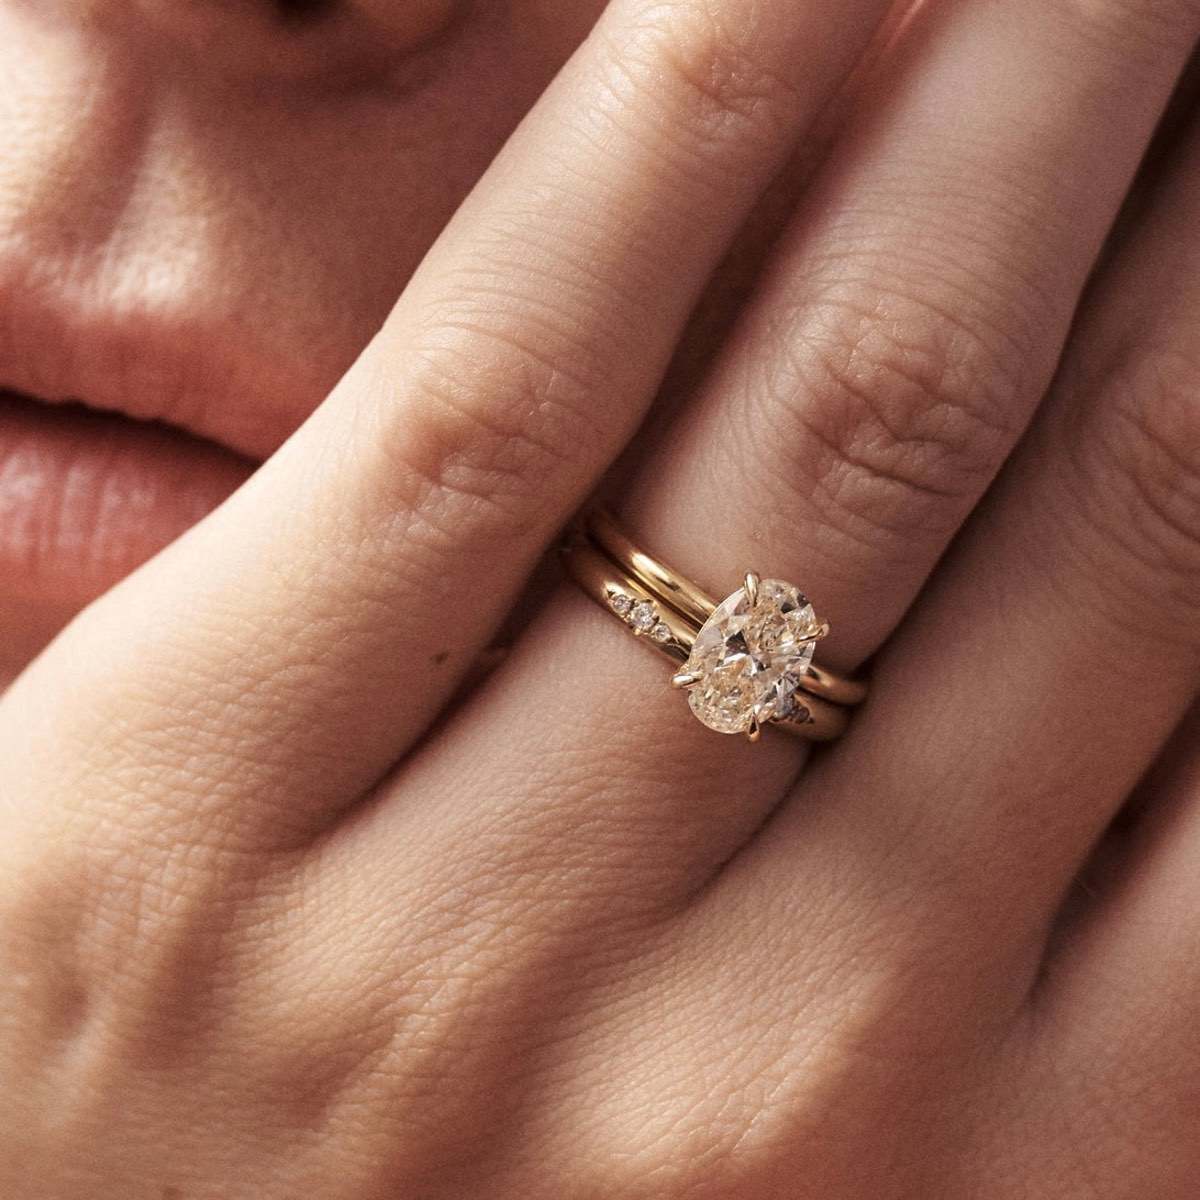 30 Round Engagement Rings - Timeless Classic And Not Only | Oh So Perfect  Proposal